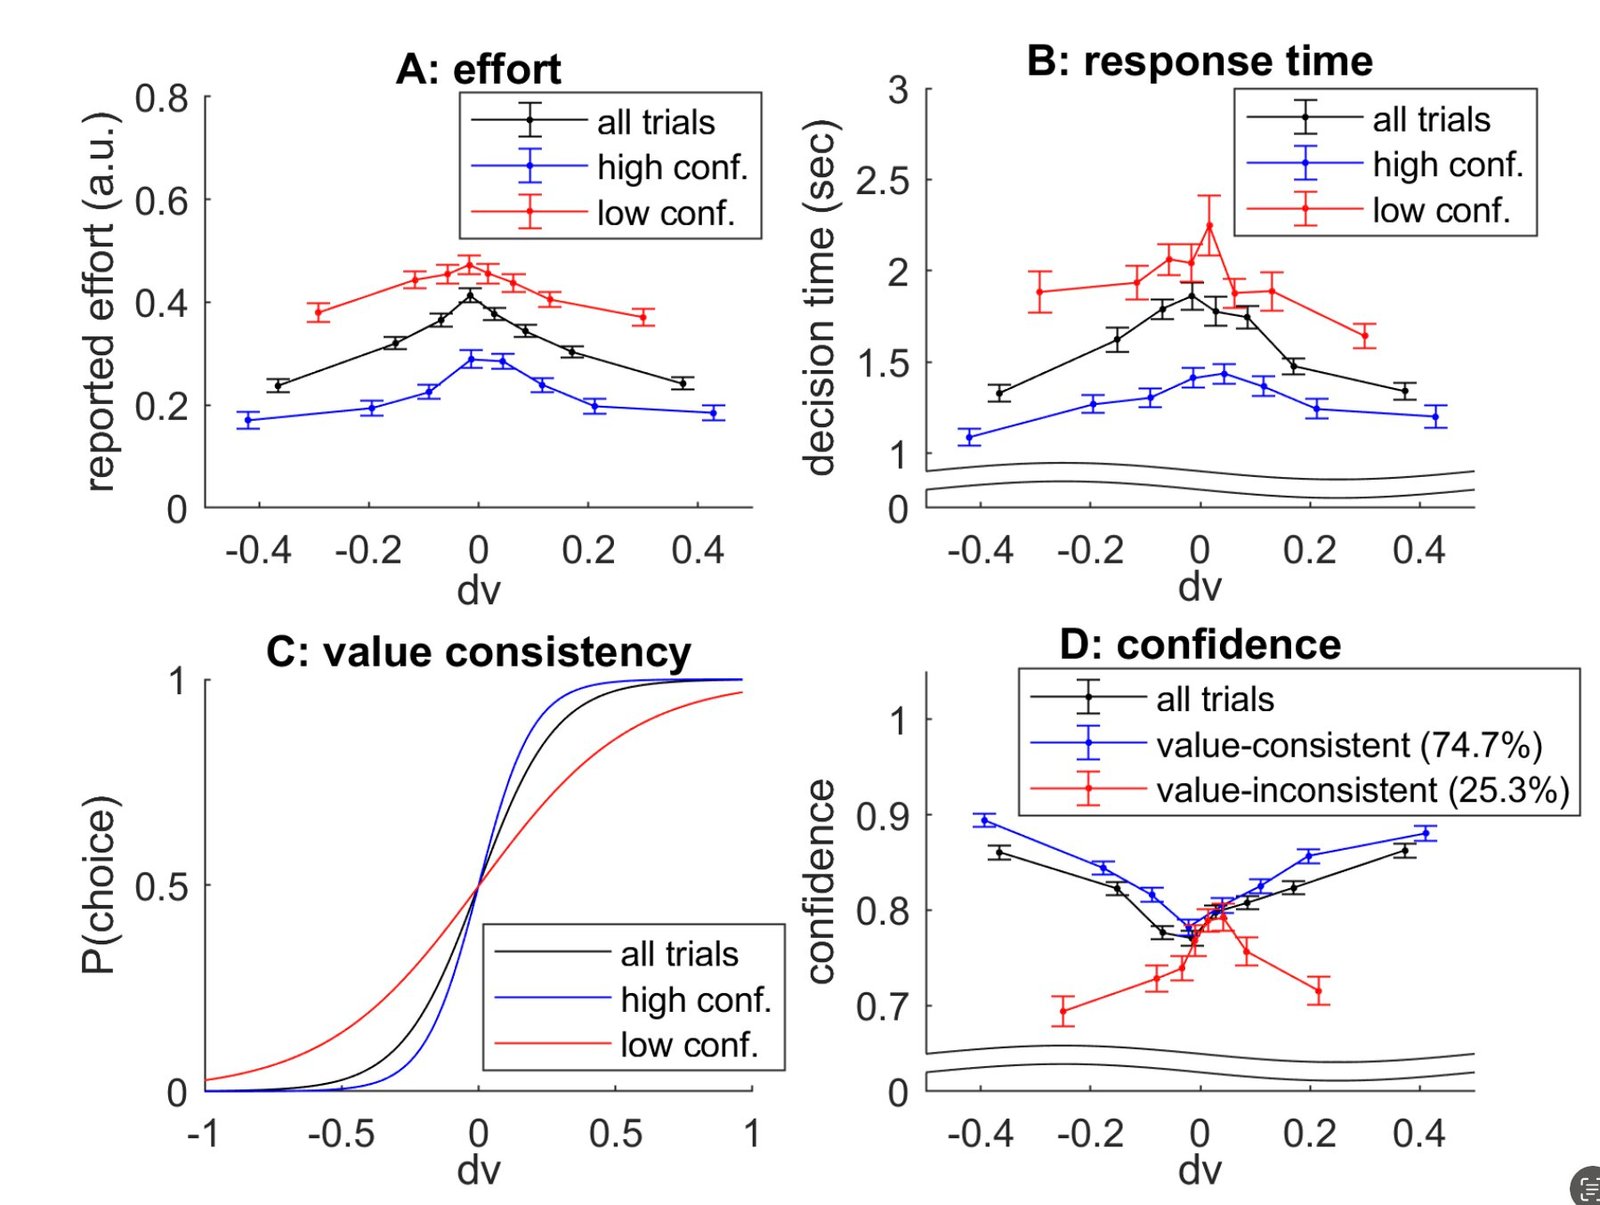 A minimal cognitive architecture reproduces control of human decision-making processes